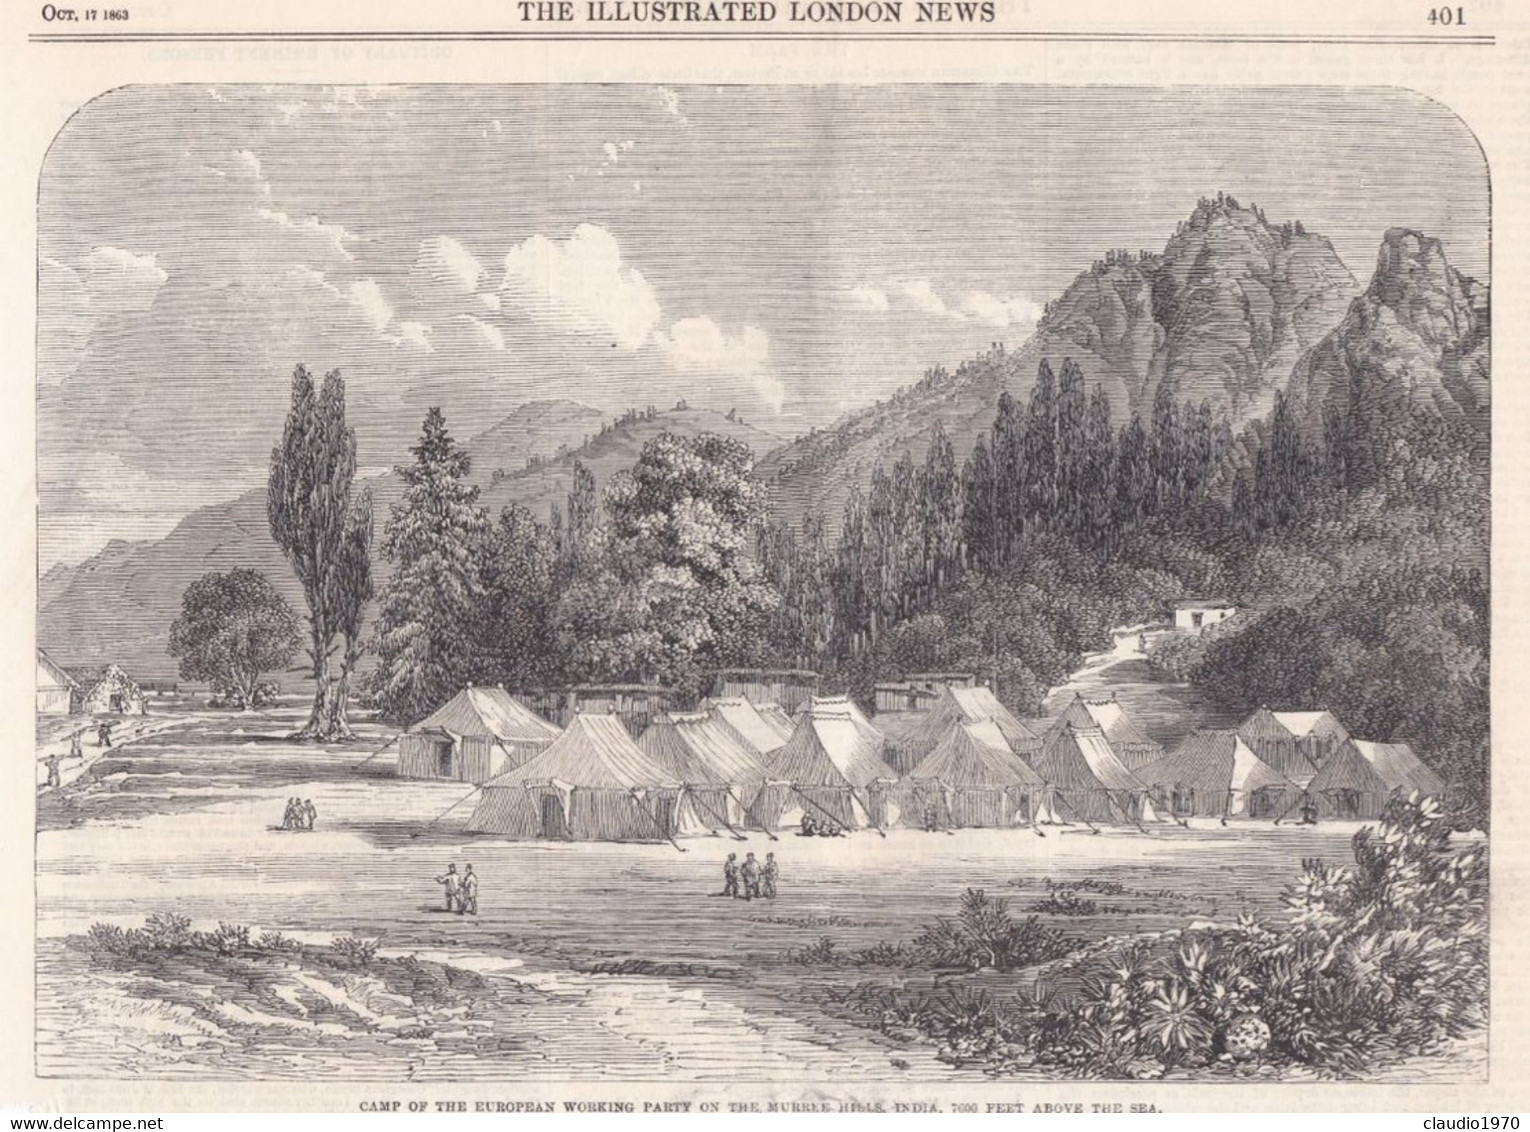 THE ILLUSTRATED LONDON NEWS  - RITAGLIO - STAMPA -CAMP OF EUROPEAN WORKING PARTY ON THE MURREE HELLES INDIA 700 - Non Classés